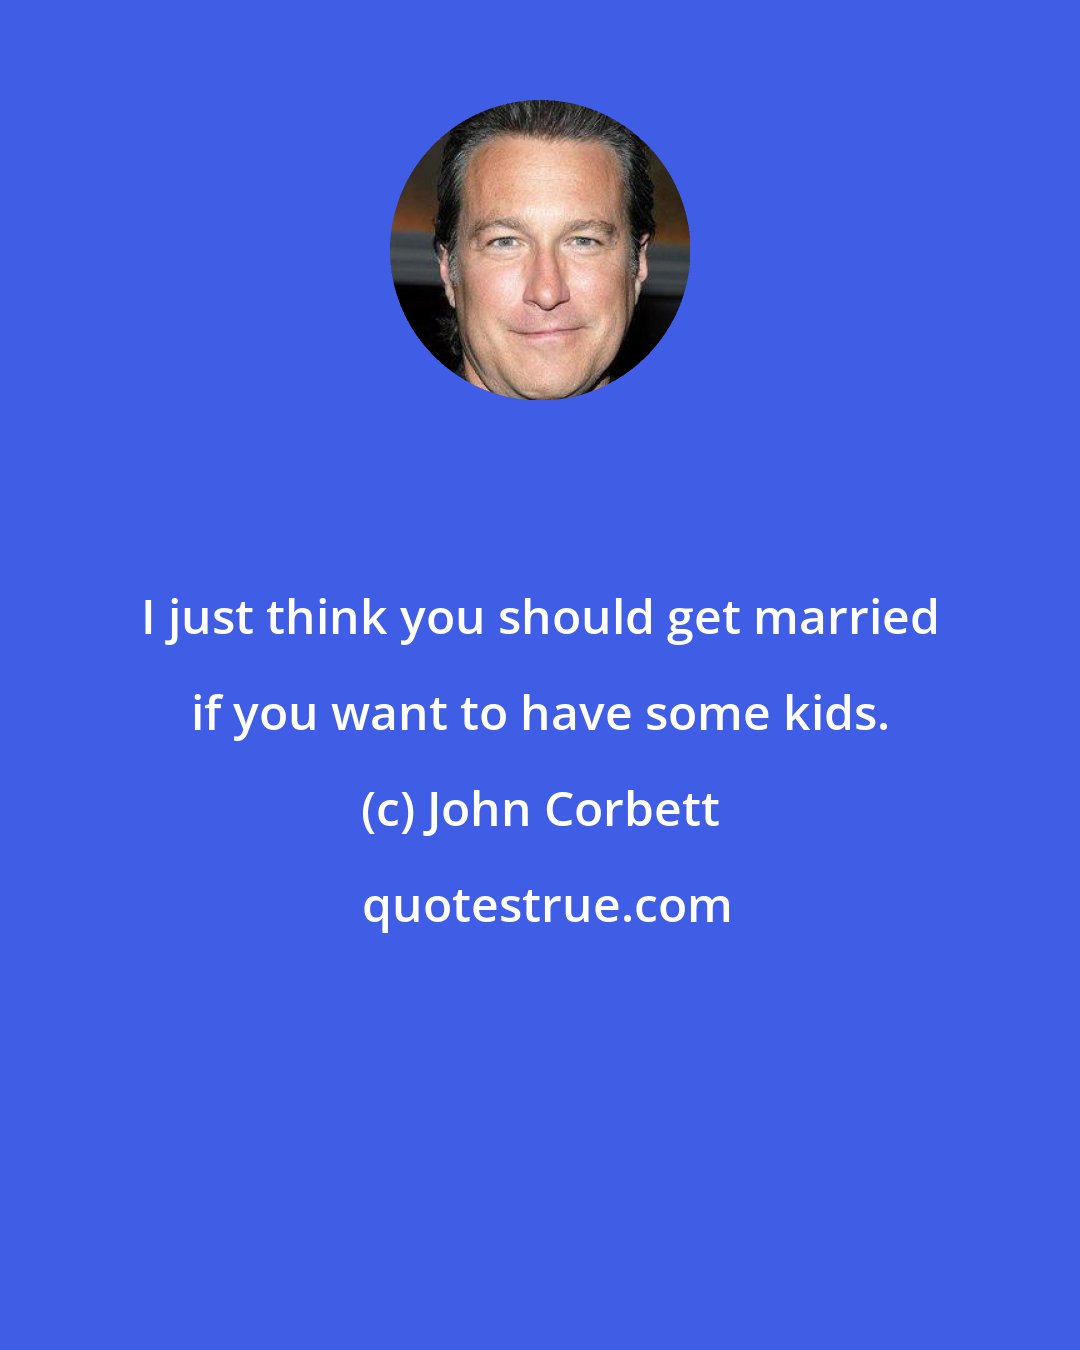 John Corbett: I just think you should get married if you want to have some kids.